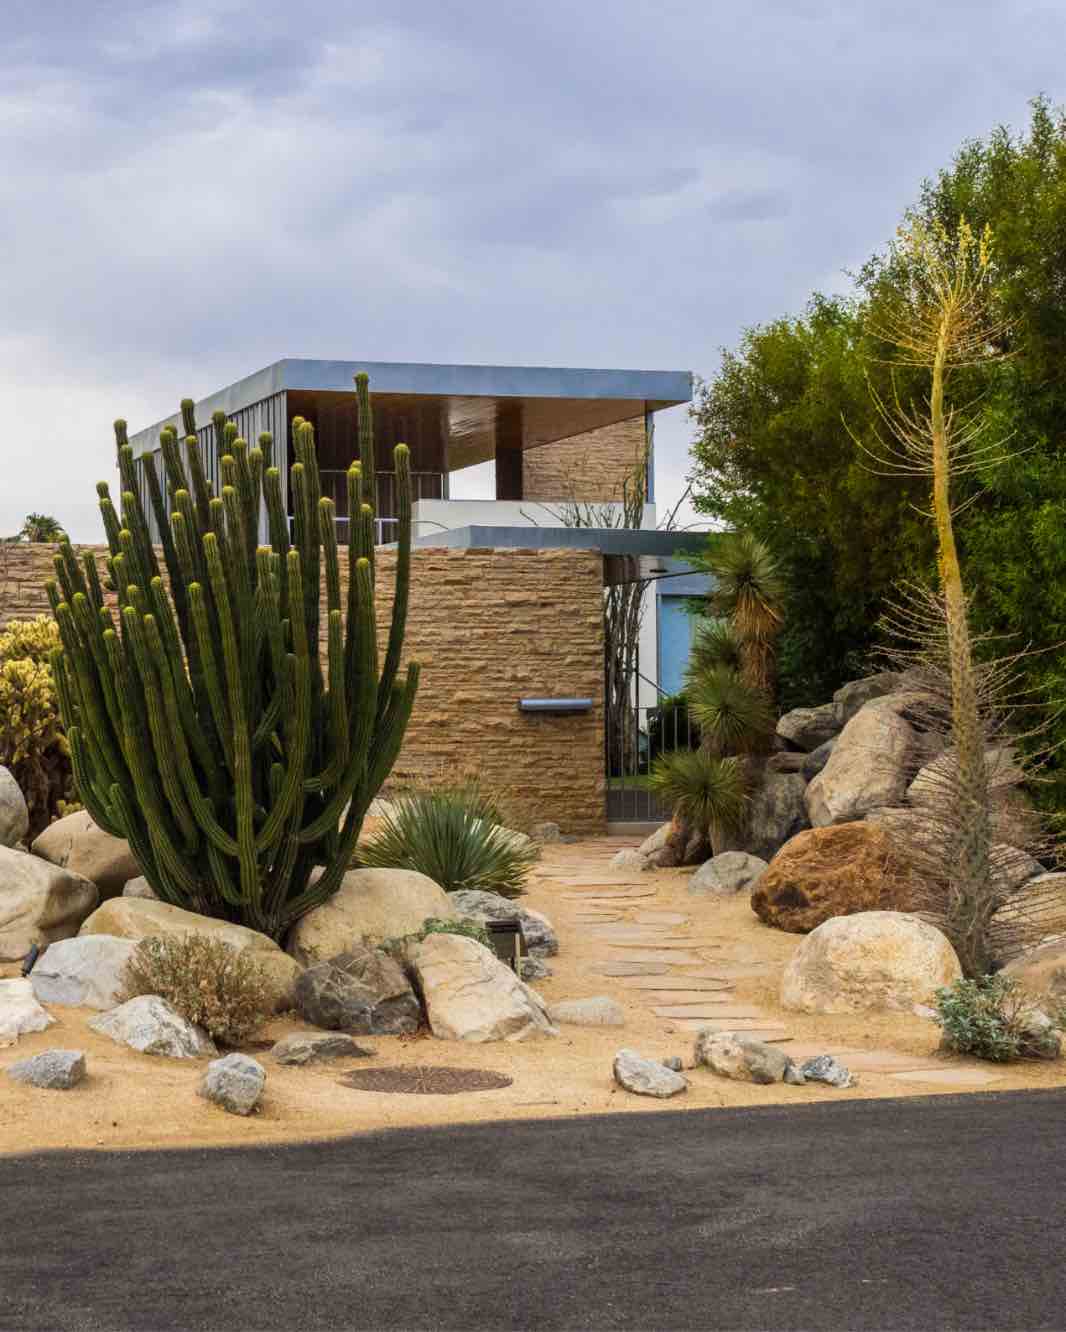 Hot Shot Sprinkler Repair & Landscape provides services for xeriscaping and zeroscaping.